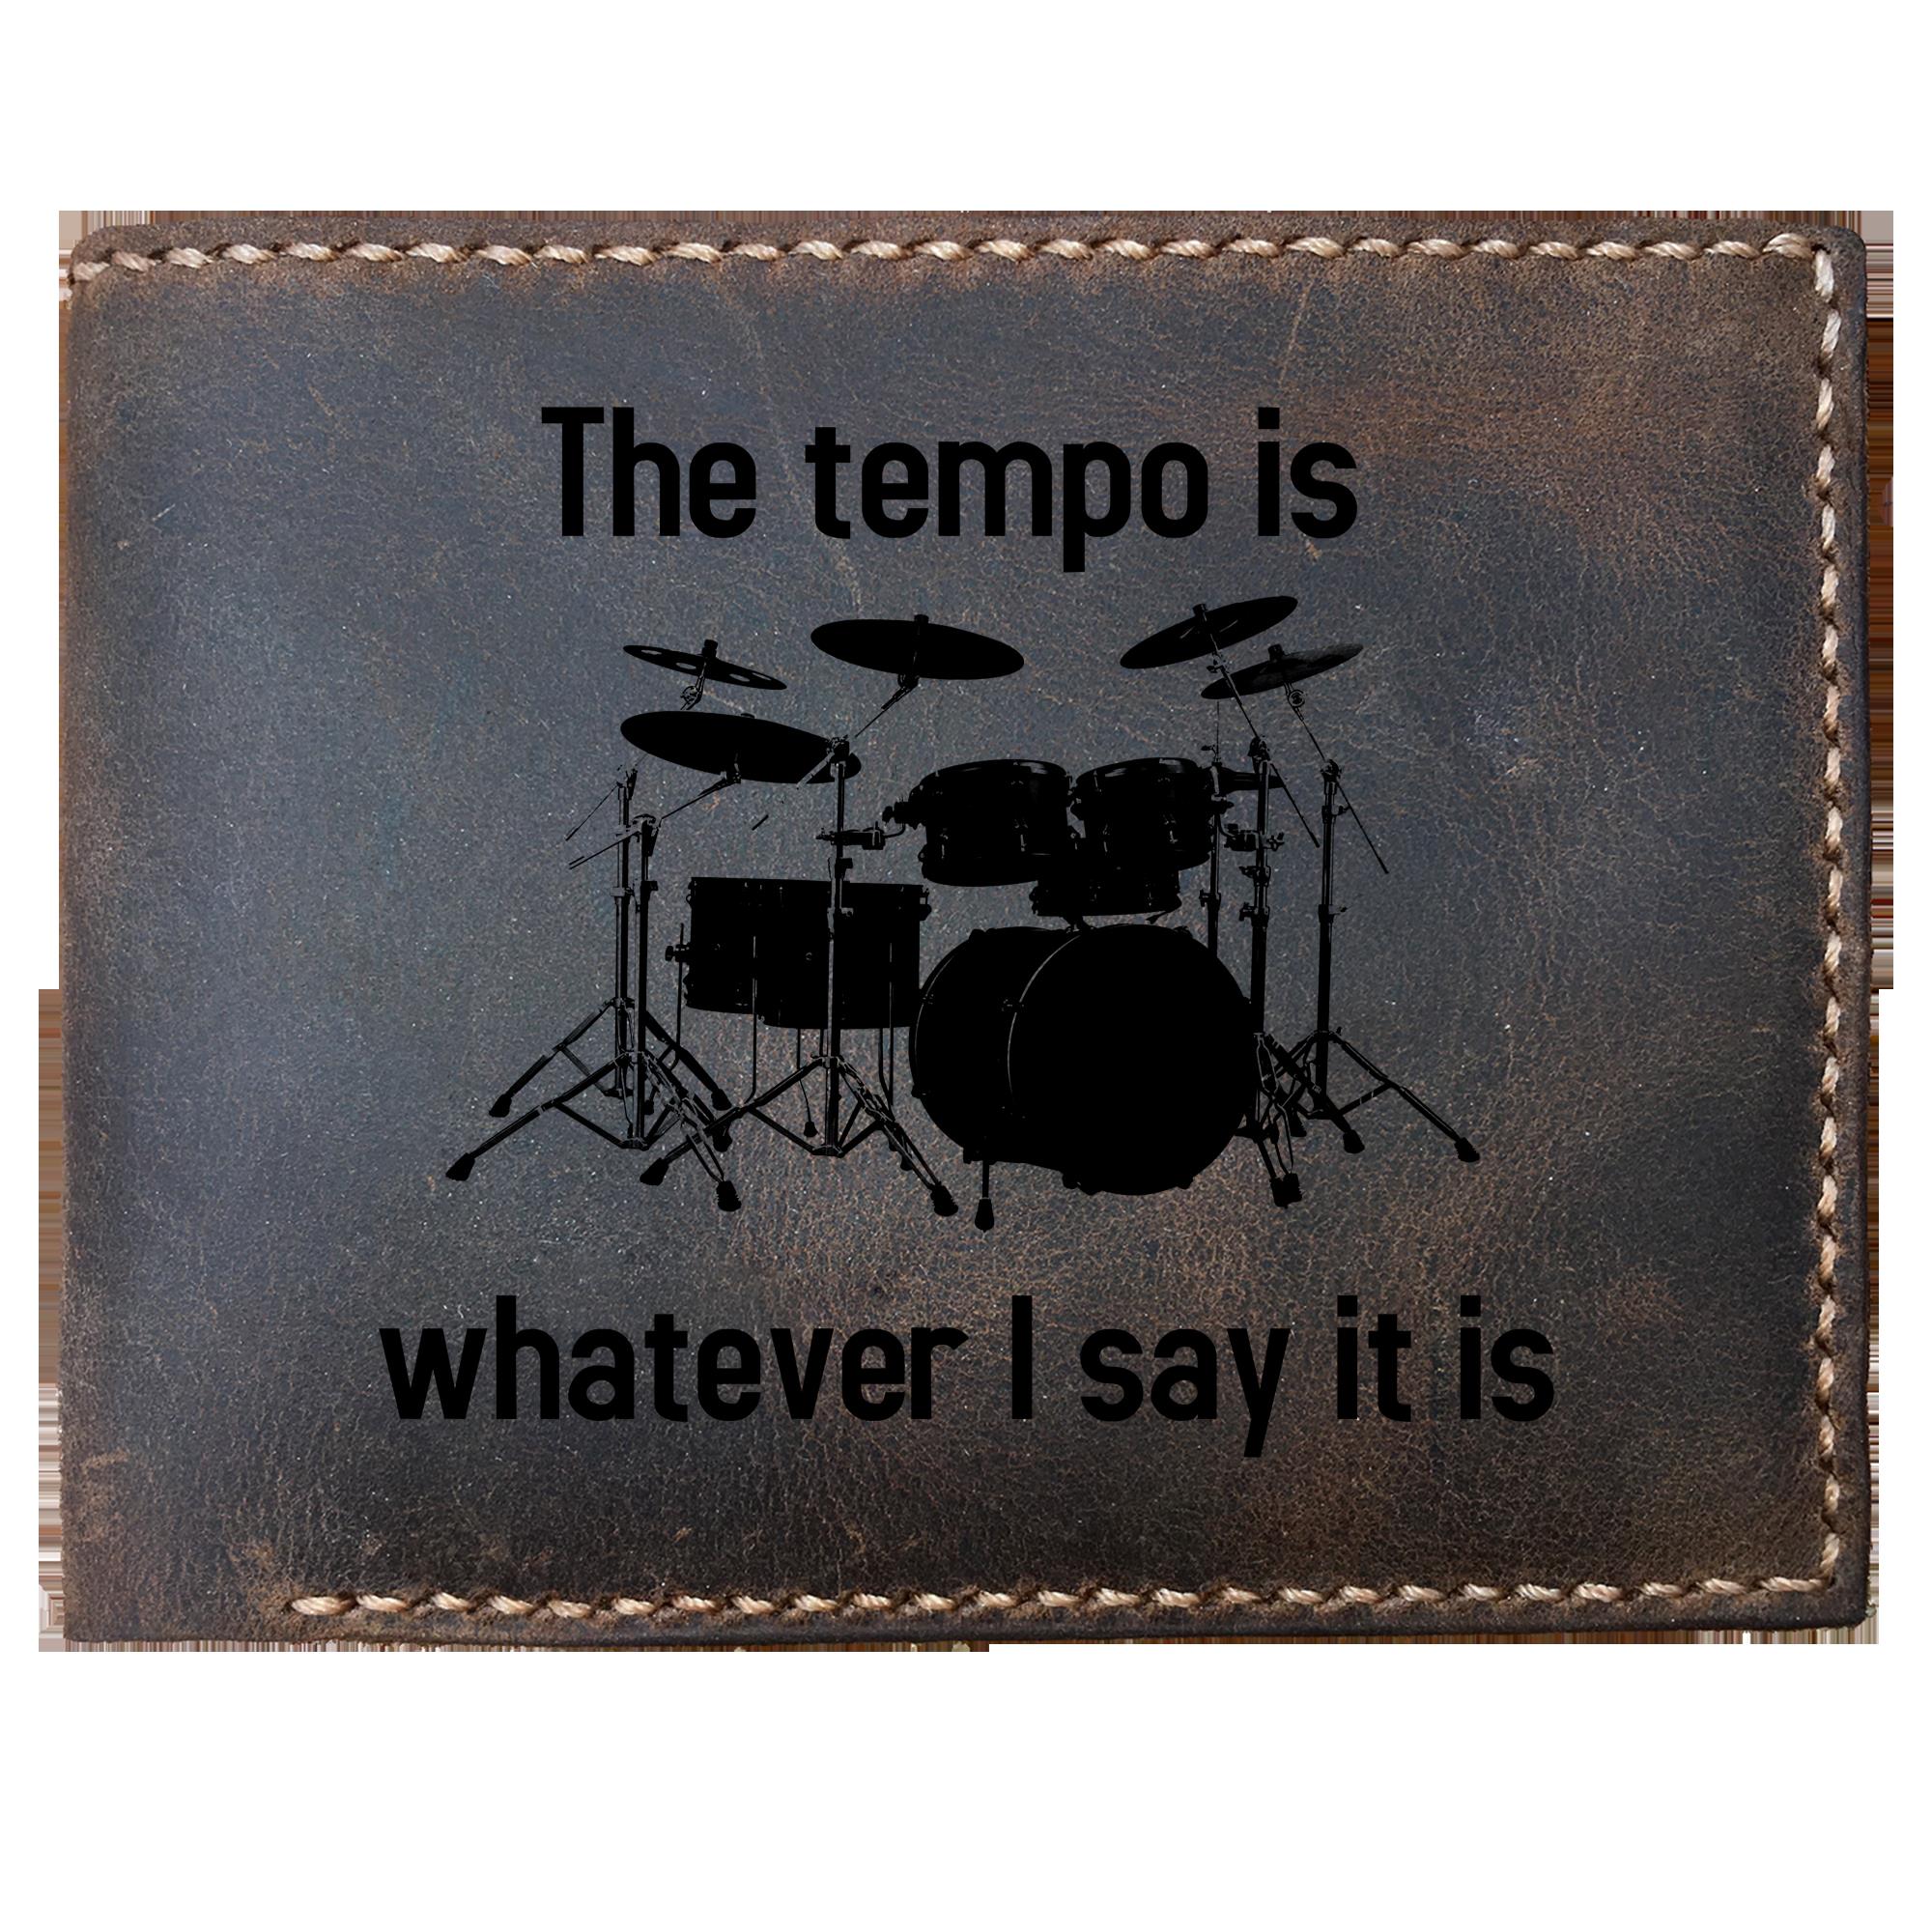 Skitongifts Funny Custom Laser Engraved Bifold Leather Wallet For Men, The Tempo Is Whatever I Say It Is Funny Drummer